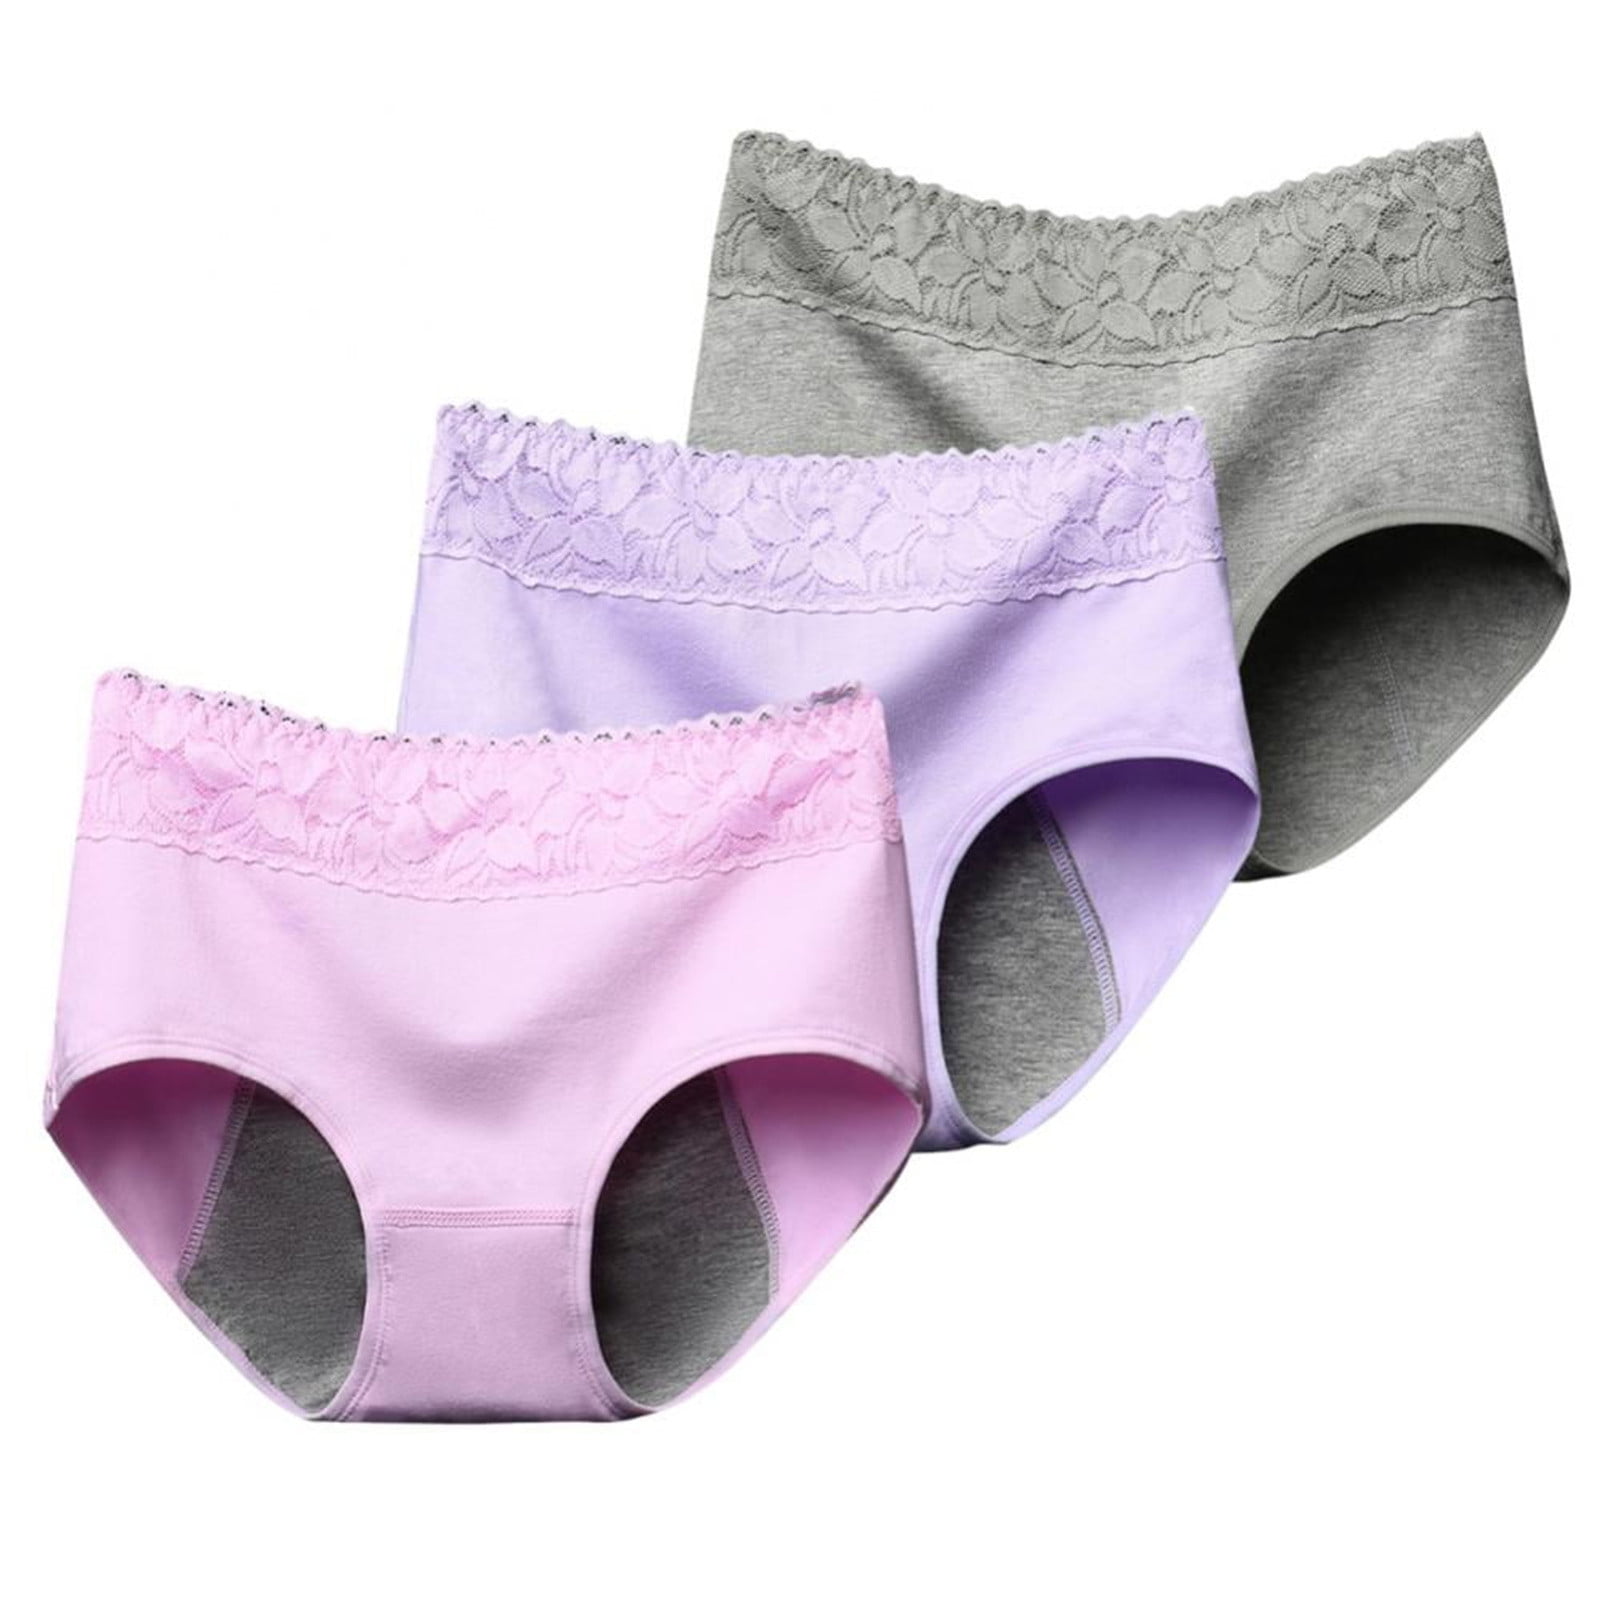 Fashion Comfortz Girls,Ladies,Undergarments,Innerwear for Women Thong  Multicolor Panty - Buy Fashion Comfortz Girls,Ladies,Undergarments,Innerwear  for Women Thong Multicolor Panty Online at Best Prices in India